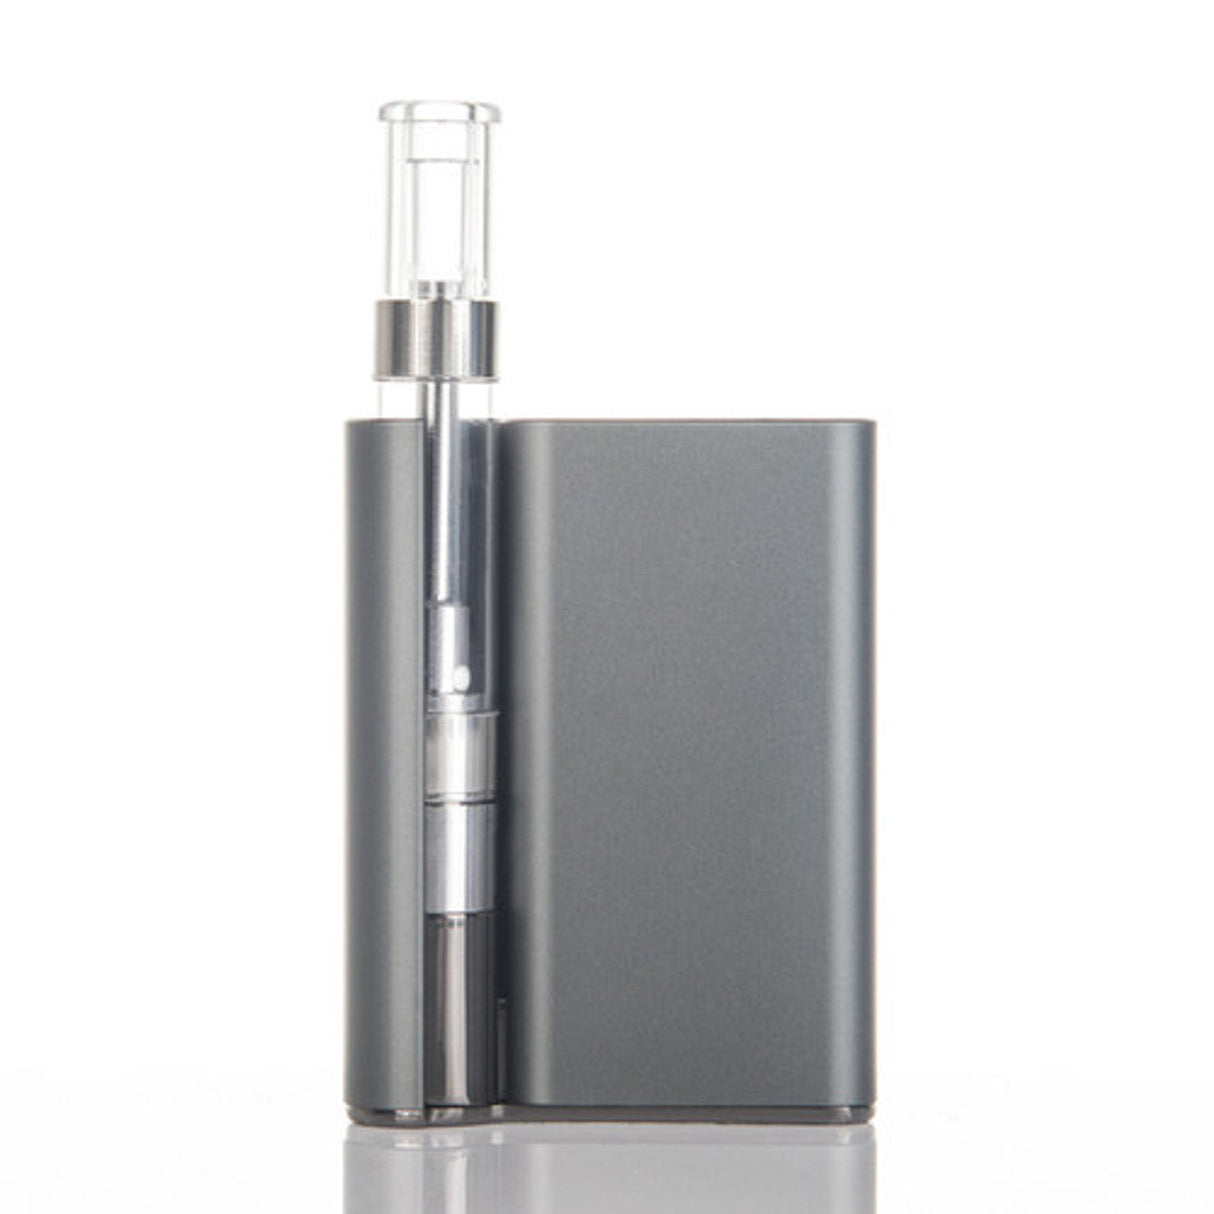 CCELL Palm Cartridge Vaporizer in Grey - 550mAh with Sleek Design, Front View